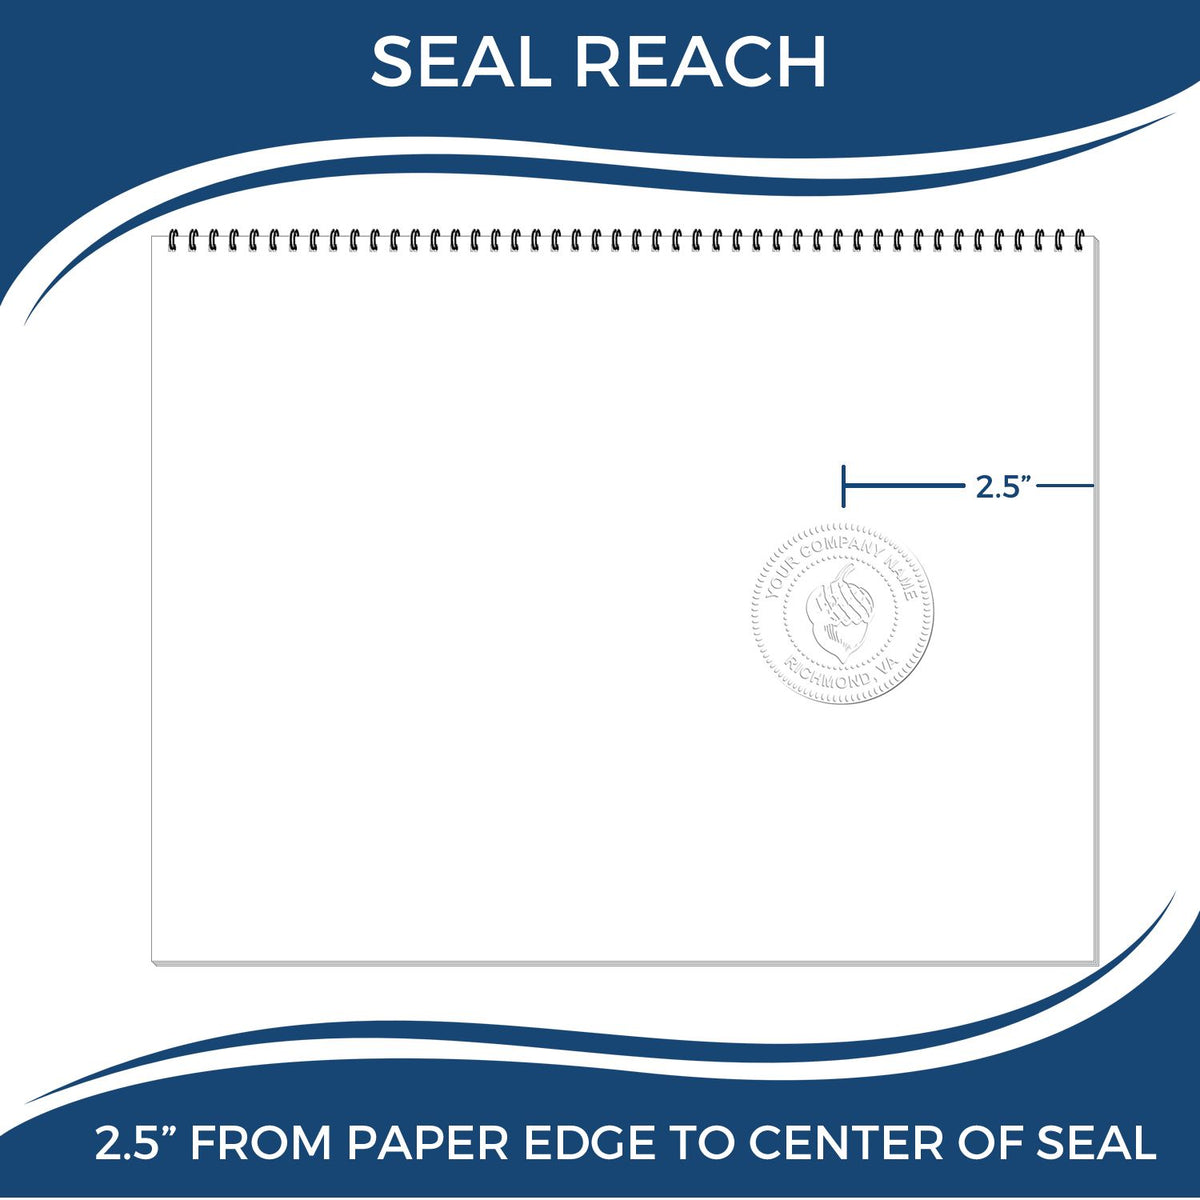 An infographic showing the seal reach which is represented by a ruler and a miniature seal image of the Heavy Duty Cast Iron Oklahoma Architect Embosser